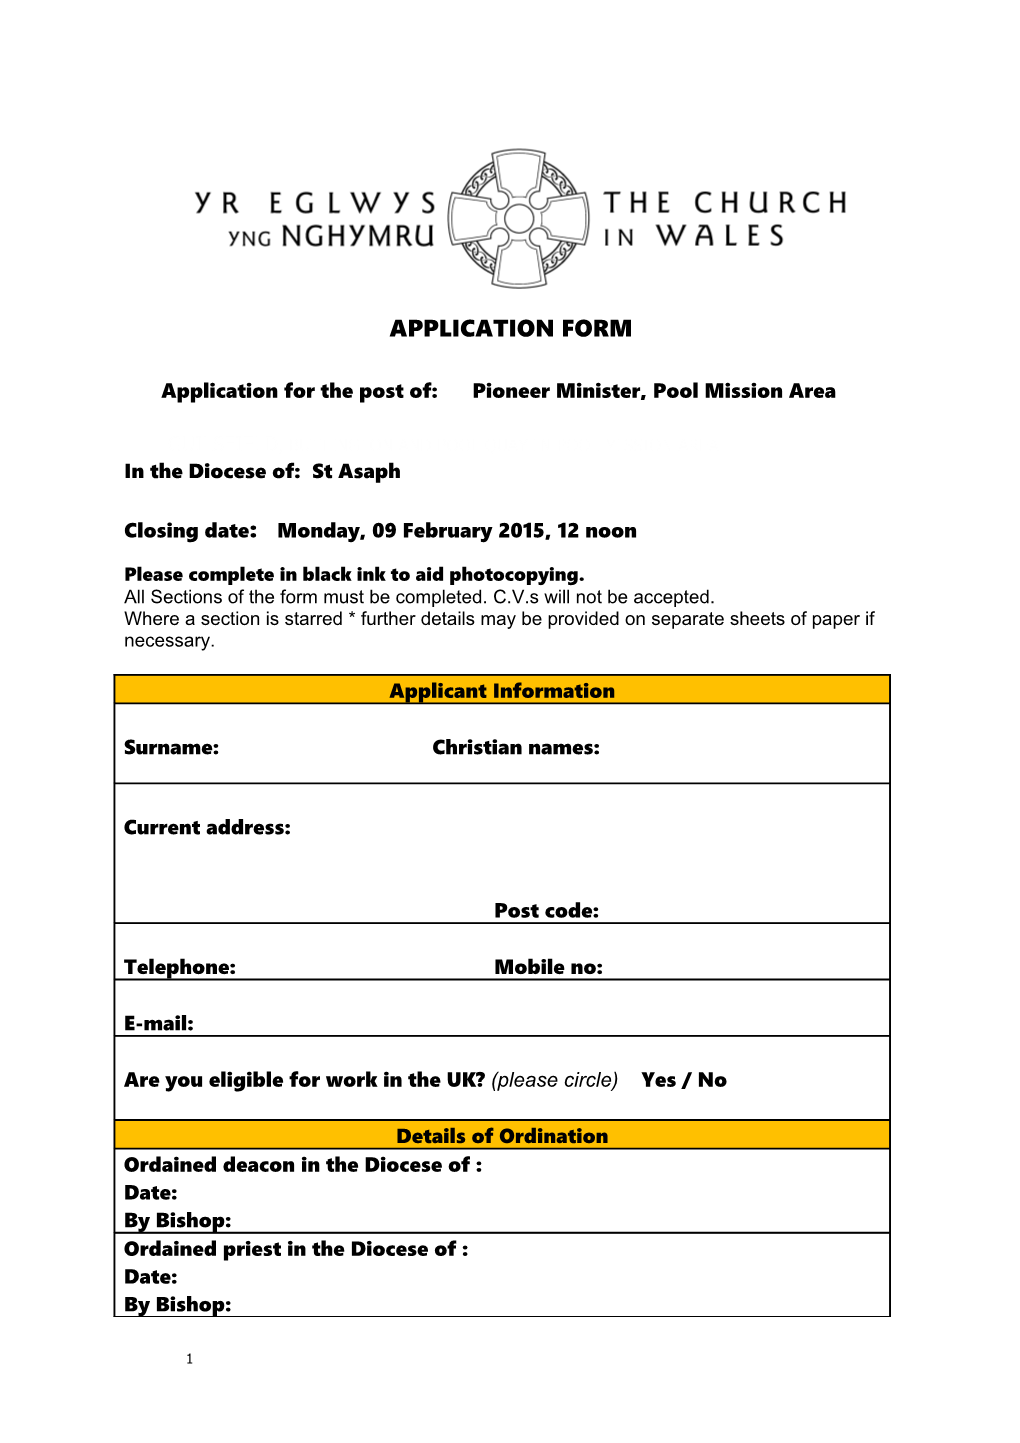 Application for the Post Of: Pioneer Minister, Pool Mission Area